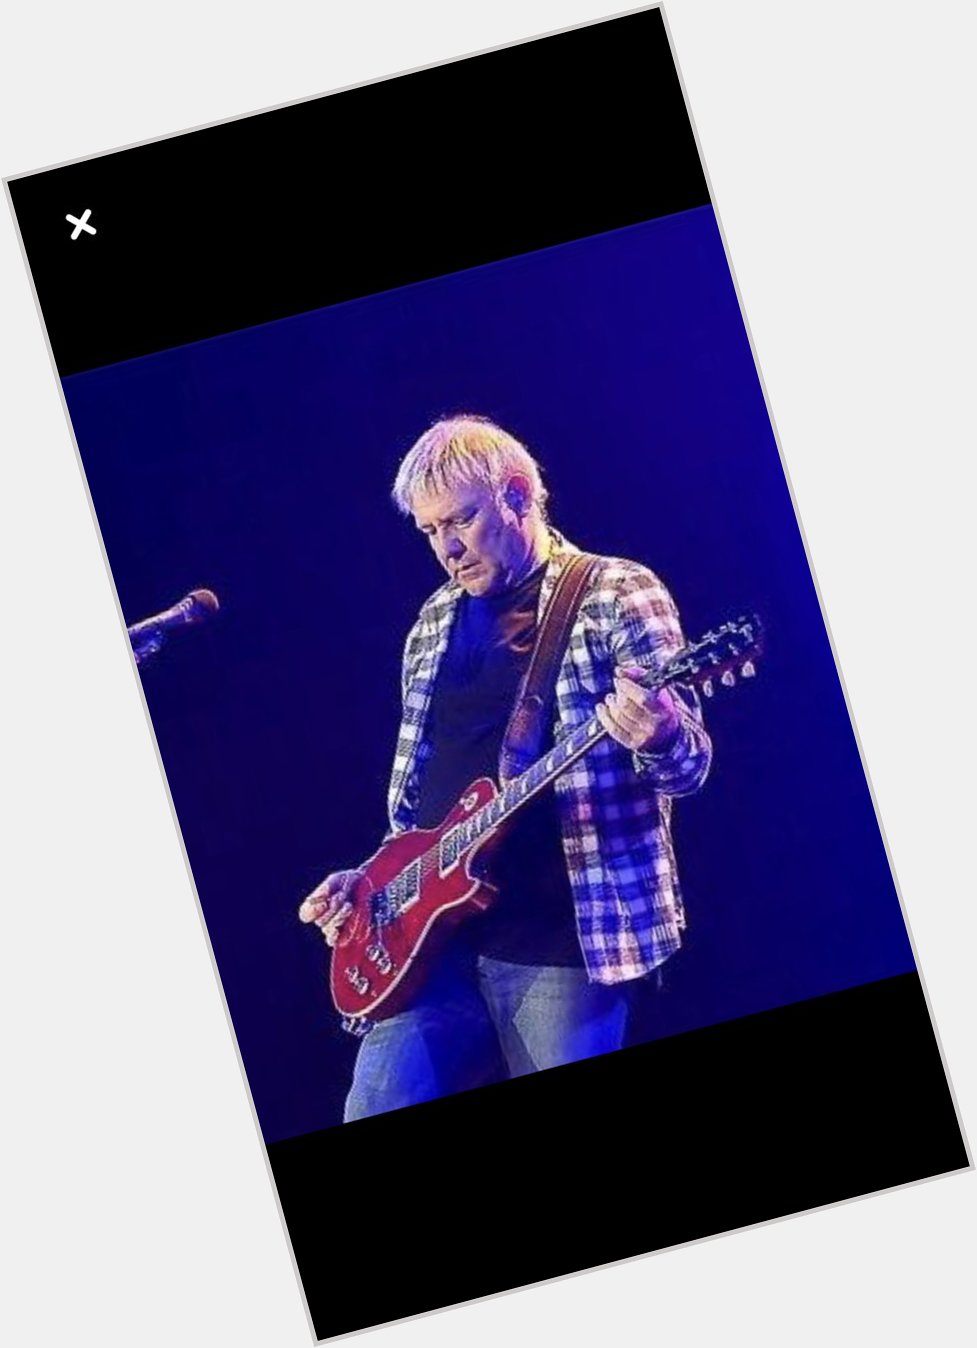 Good morning.  Happy birthday to the great Alex Lifeson. 